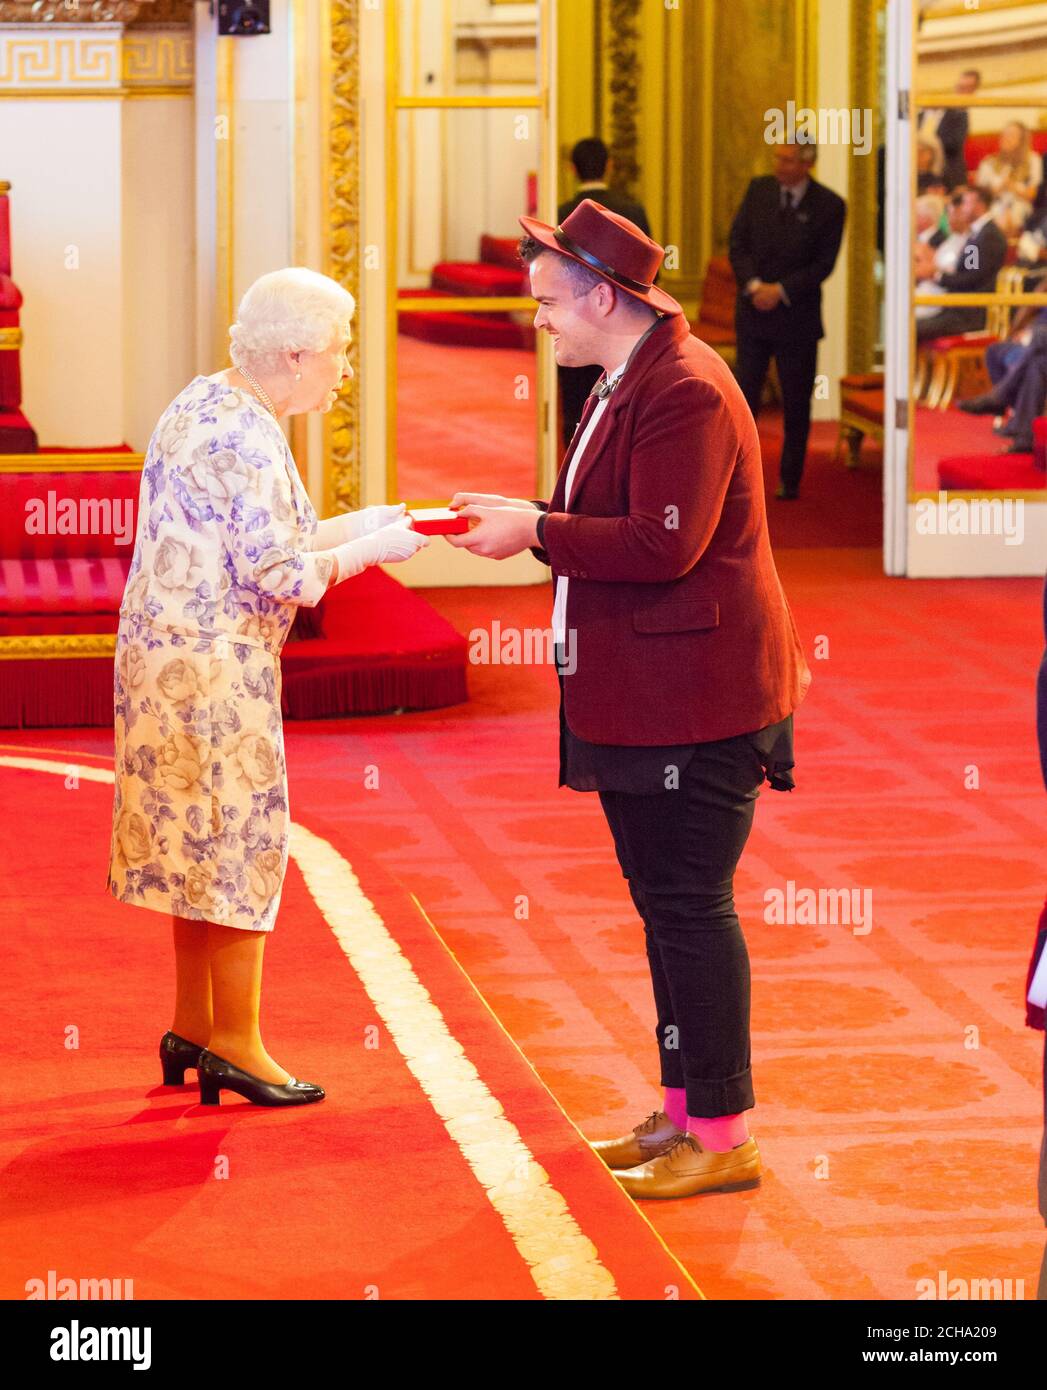 Mx. Jacob Thomas from Australia receives a medal from Queen Elizabeth II during the Queen's Young Leaders Awards 2016 at Buckingham Palace, London. PRESS ASSOCIATION Photo. Picture date: Thursday June 23, 2016. Photo credit should read: Dominic Lipinski/PA Wire Stock Photo